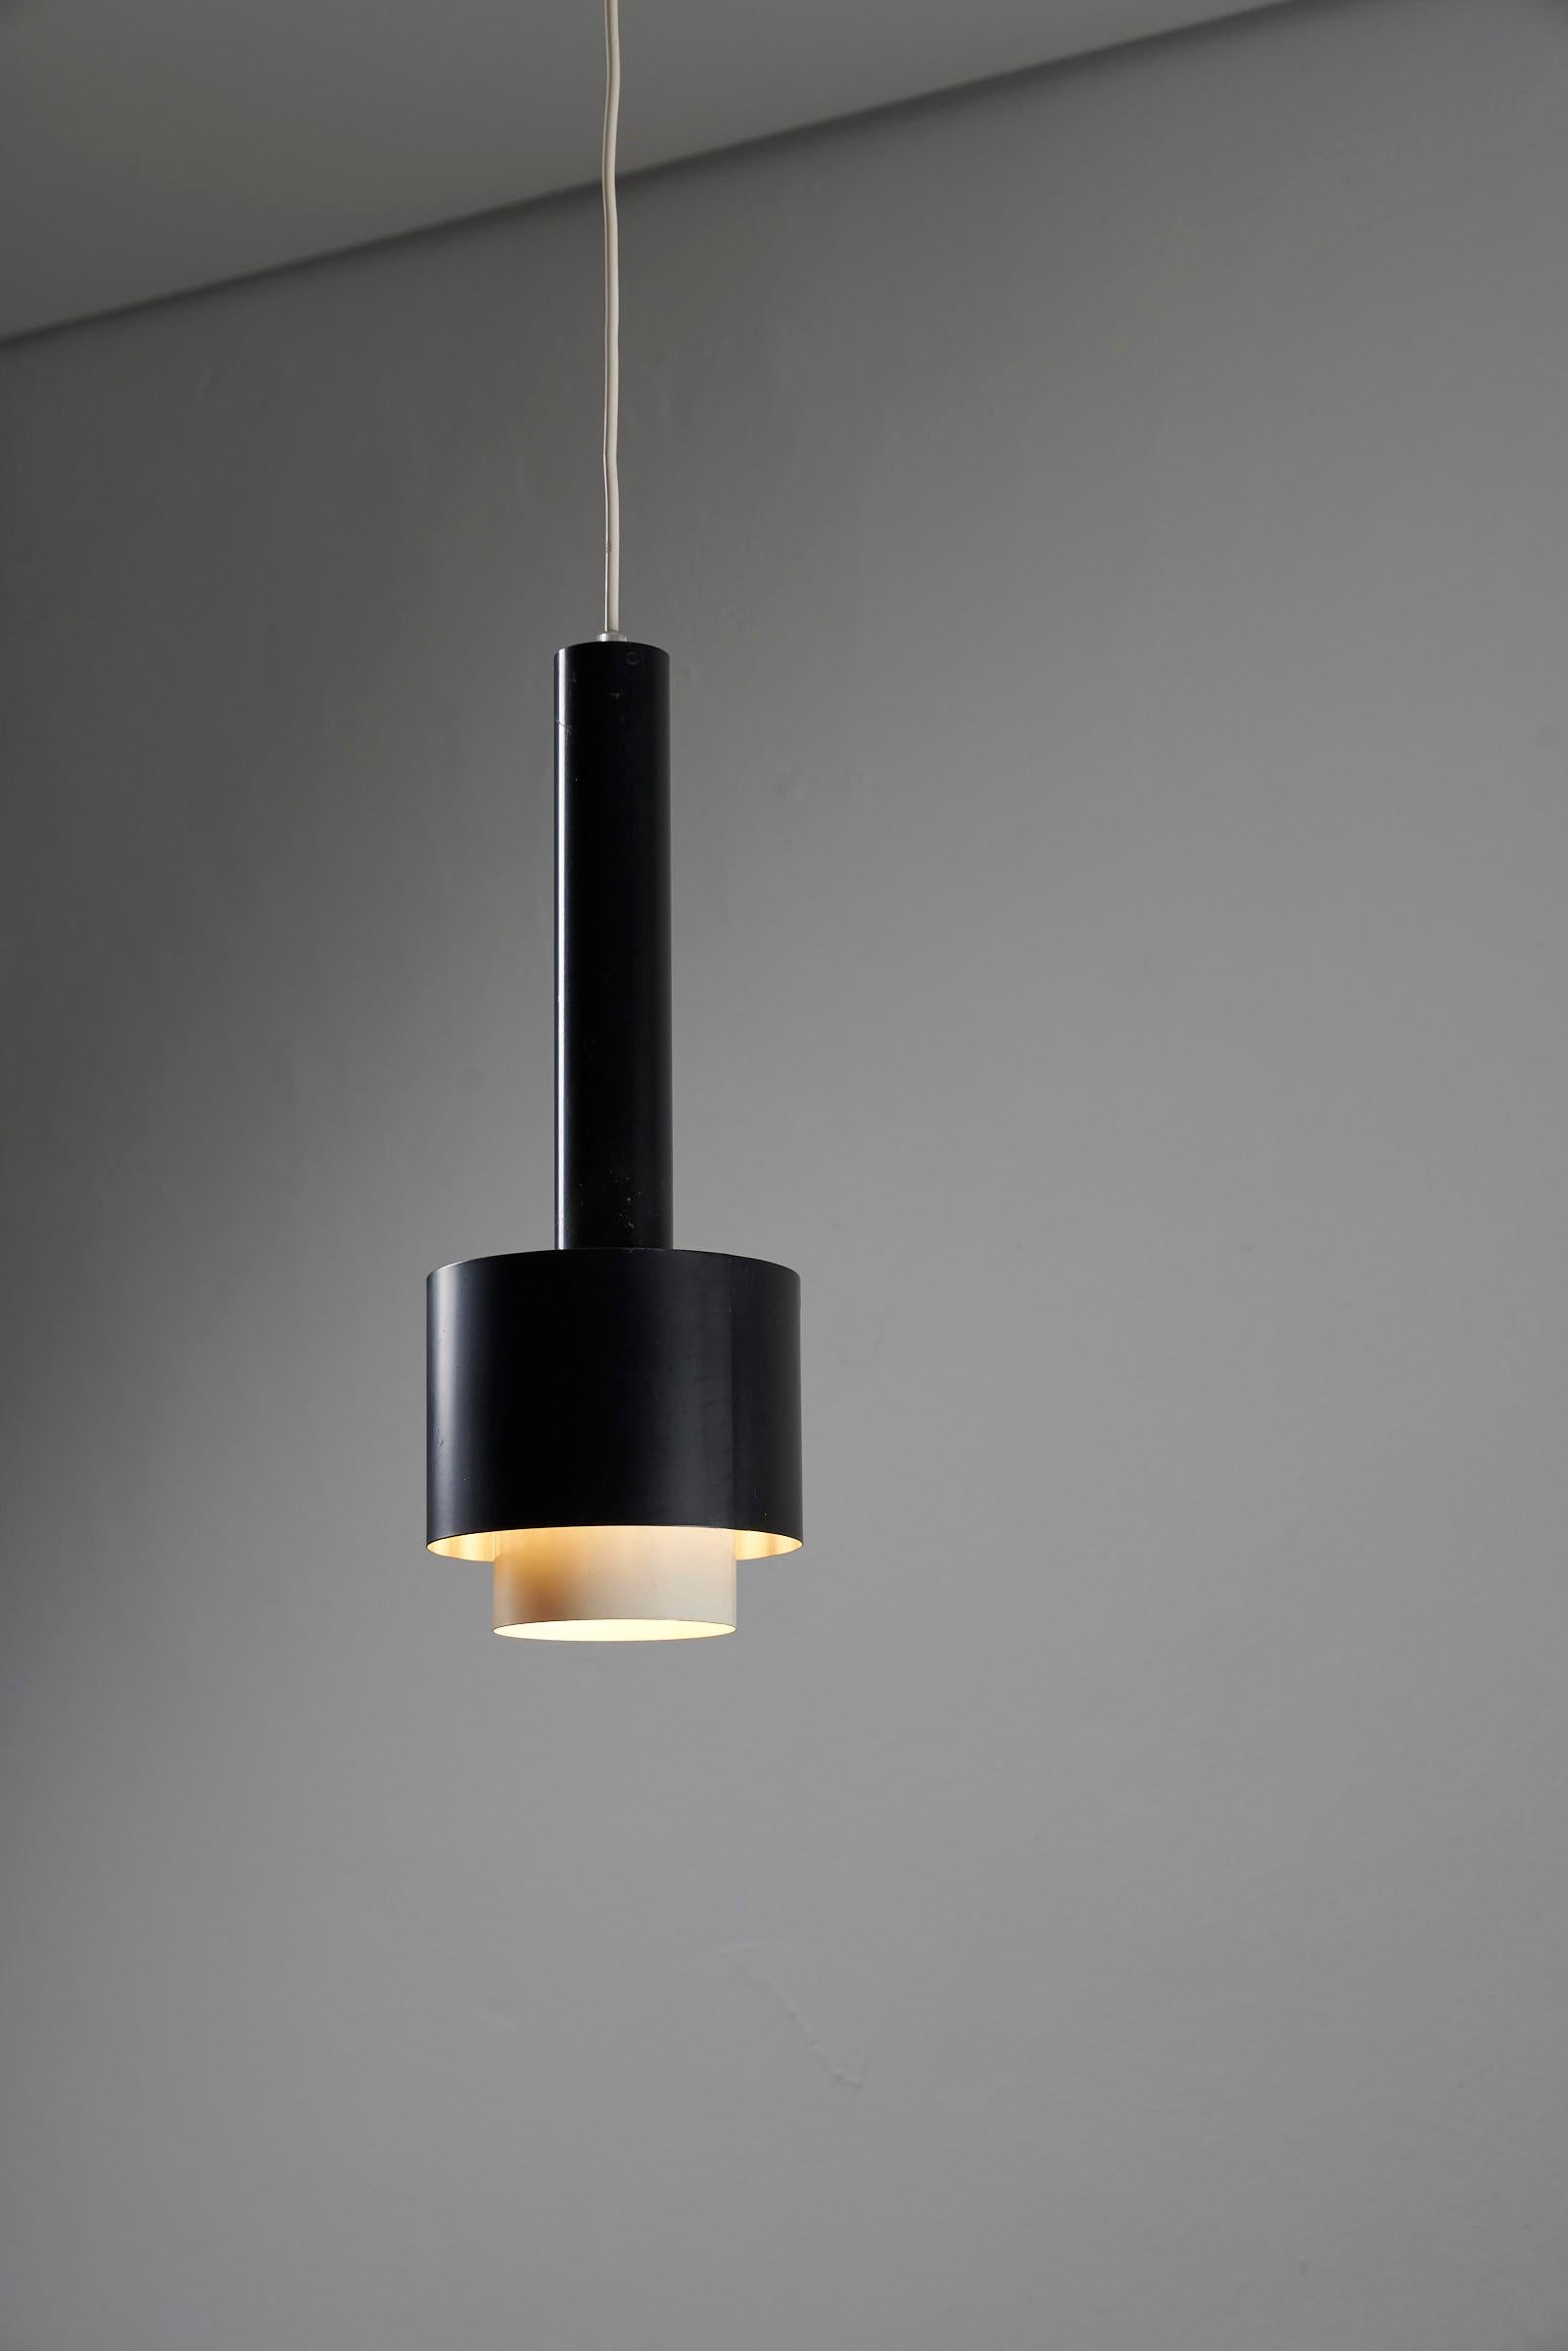 Introducing the Stylish Black Pendant by Philips, a captivating piece hailing from the Netherlands and dating back to the 1950s. This hanging pendant showcases a sleek and sophisticated design that is sure to make a statement in any interior.

The